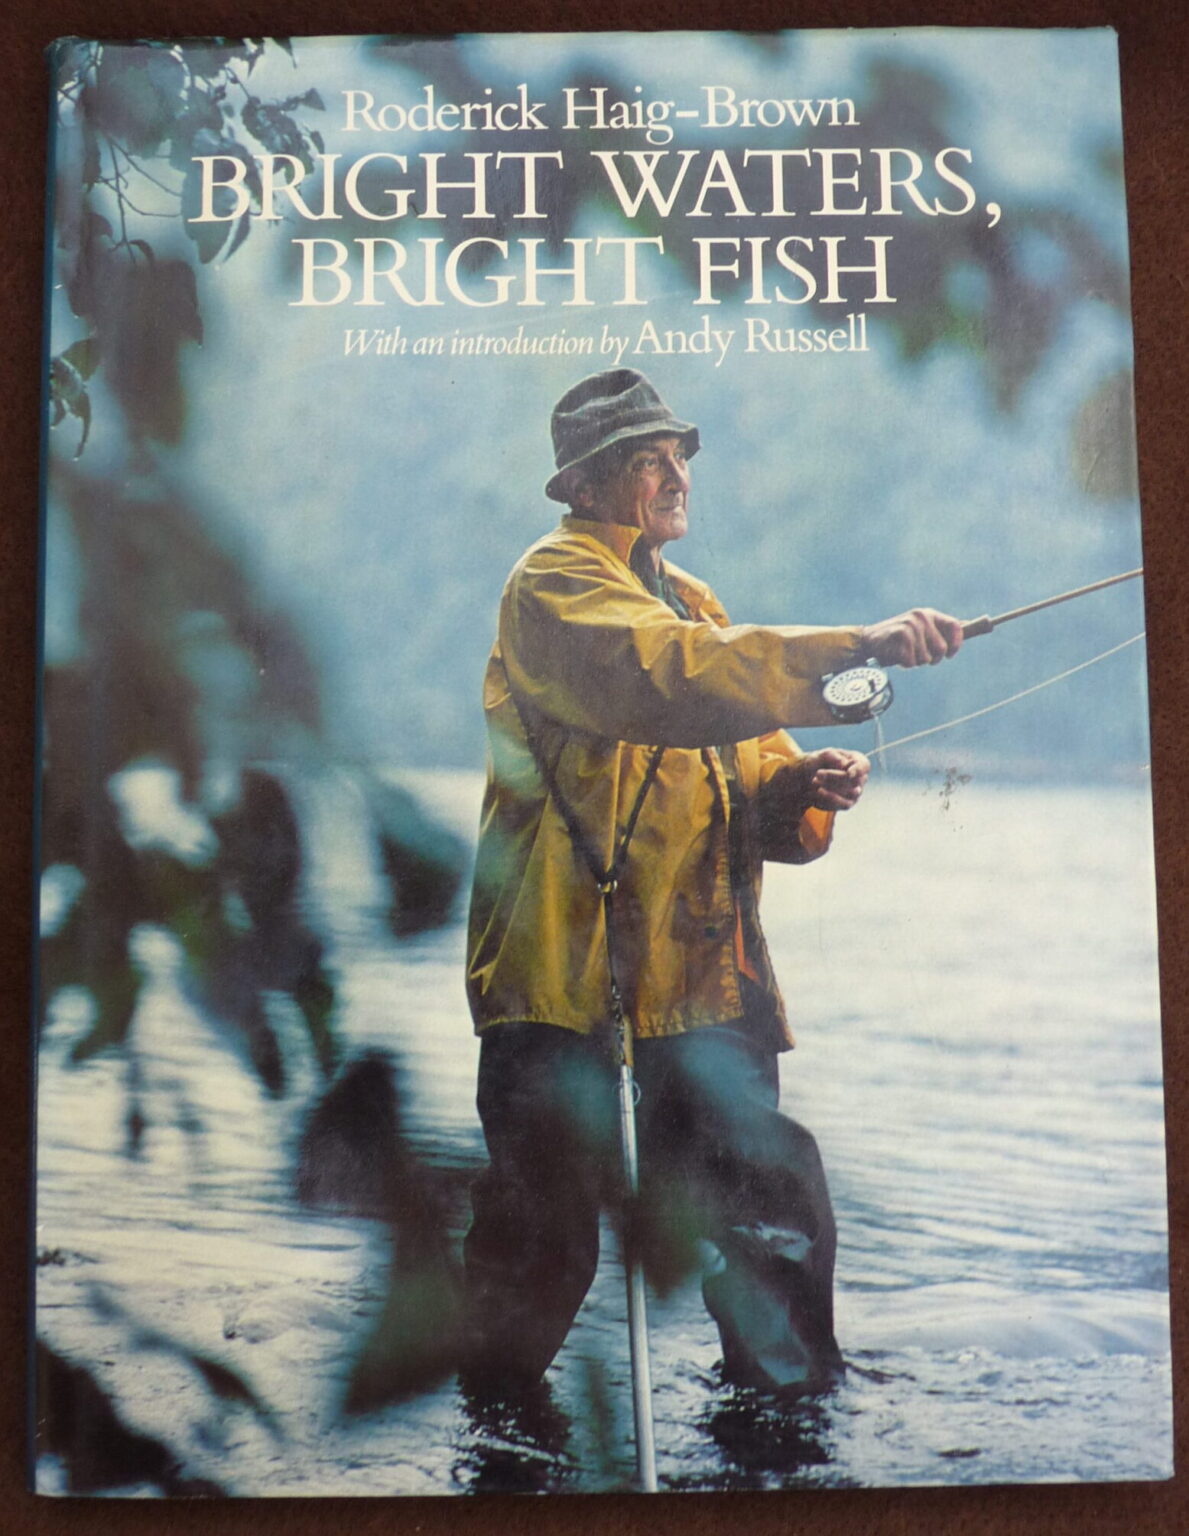 Bright Waters, Bright Fish, Roderick Haig-Brown, 1980 1st edition book